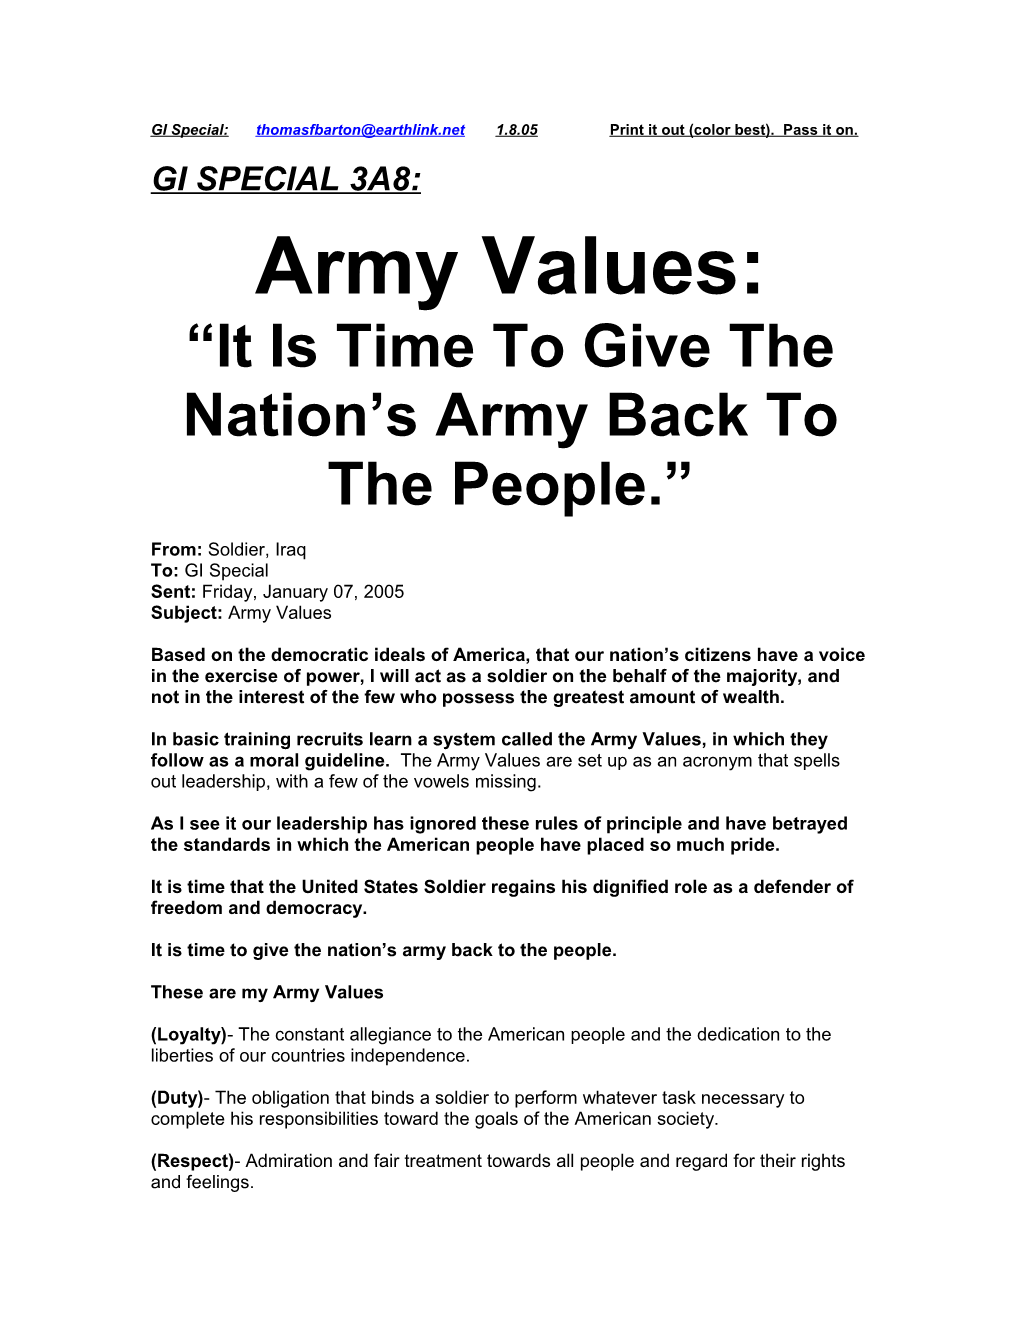 It Is Time to Give the Nation S Army Back to the People